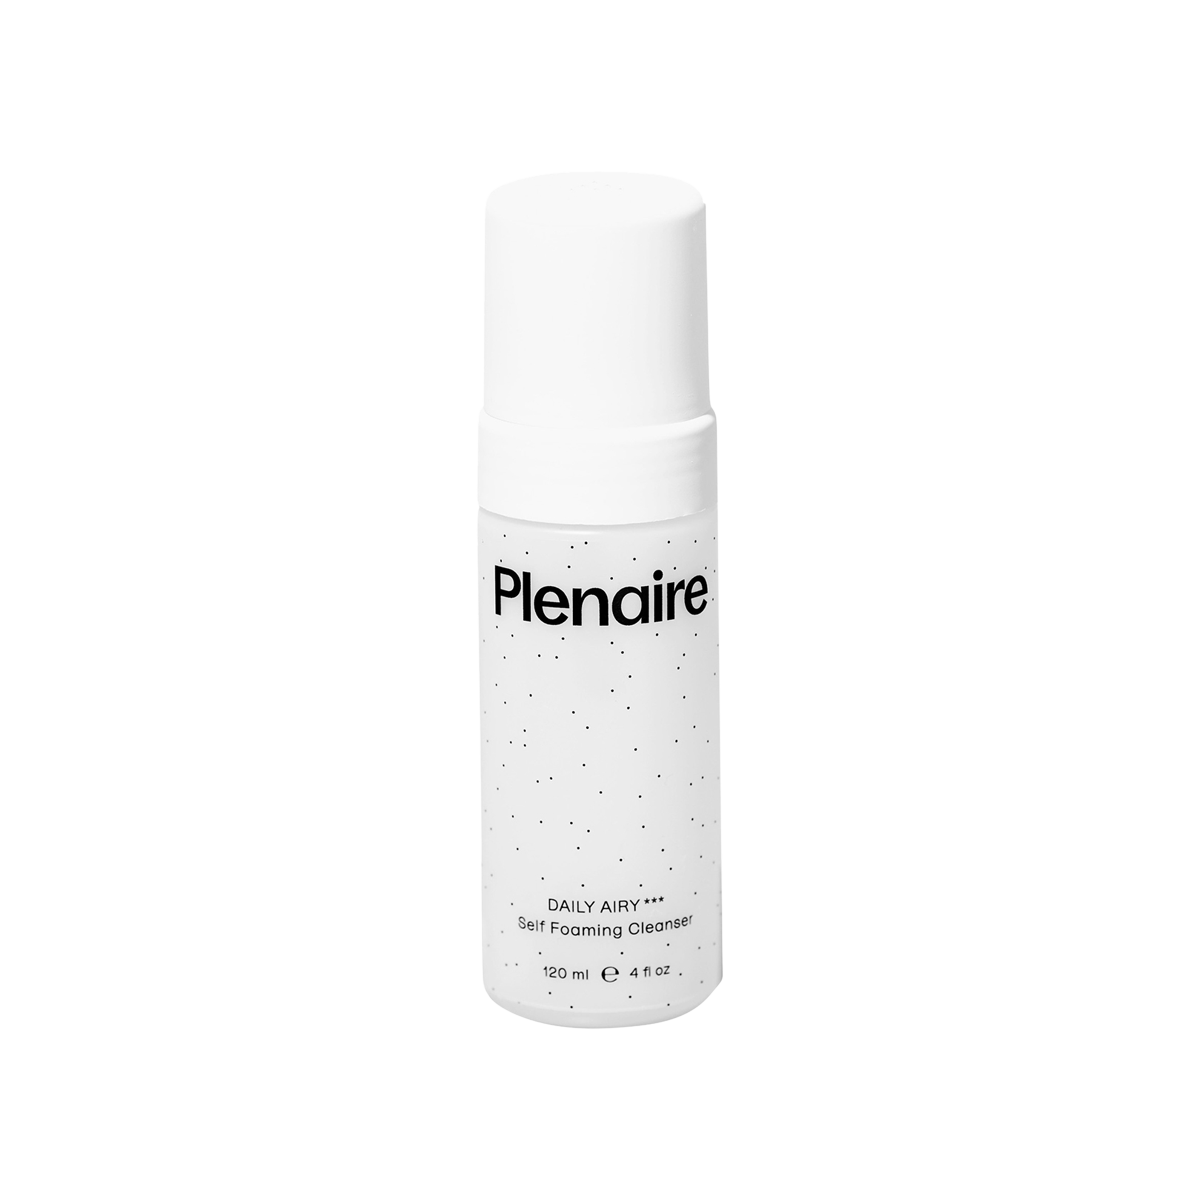 Plenaire - Daily Airy*** Self Foaming Cleanser